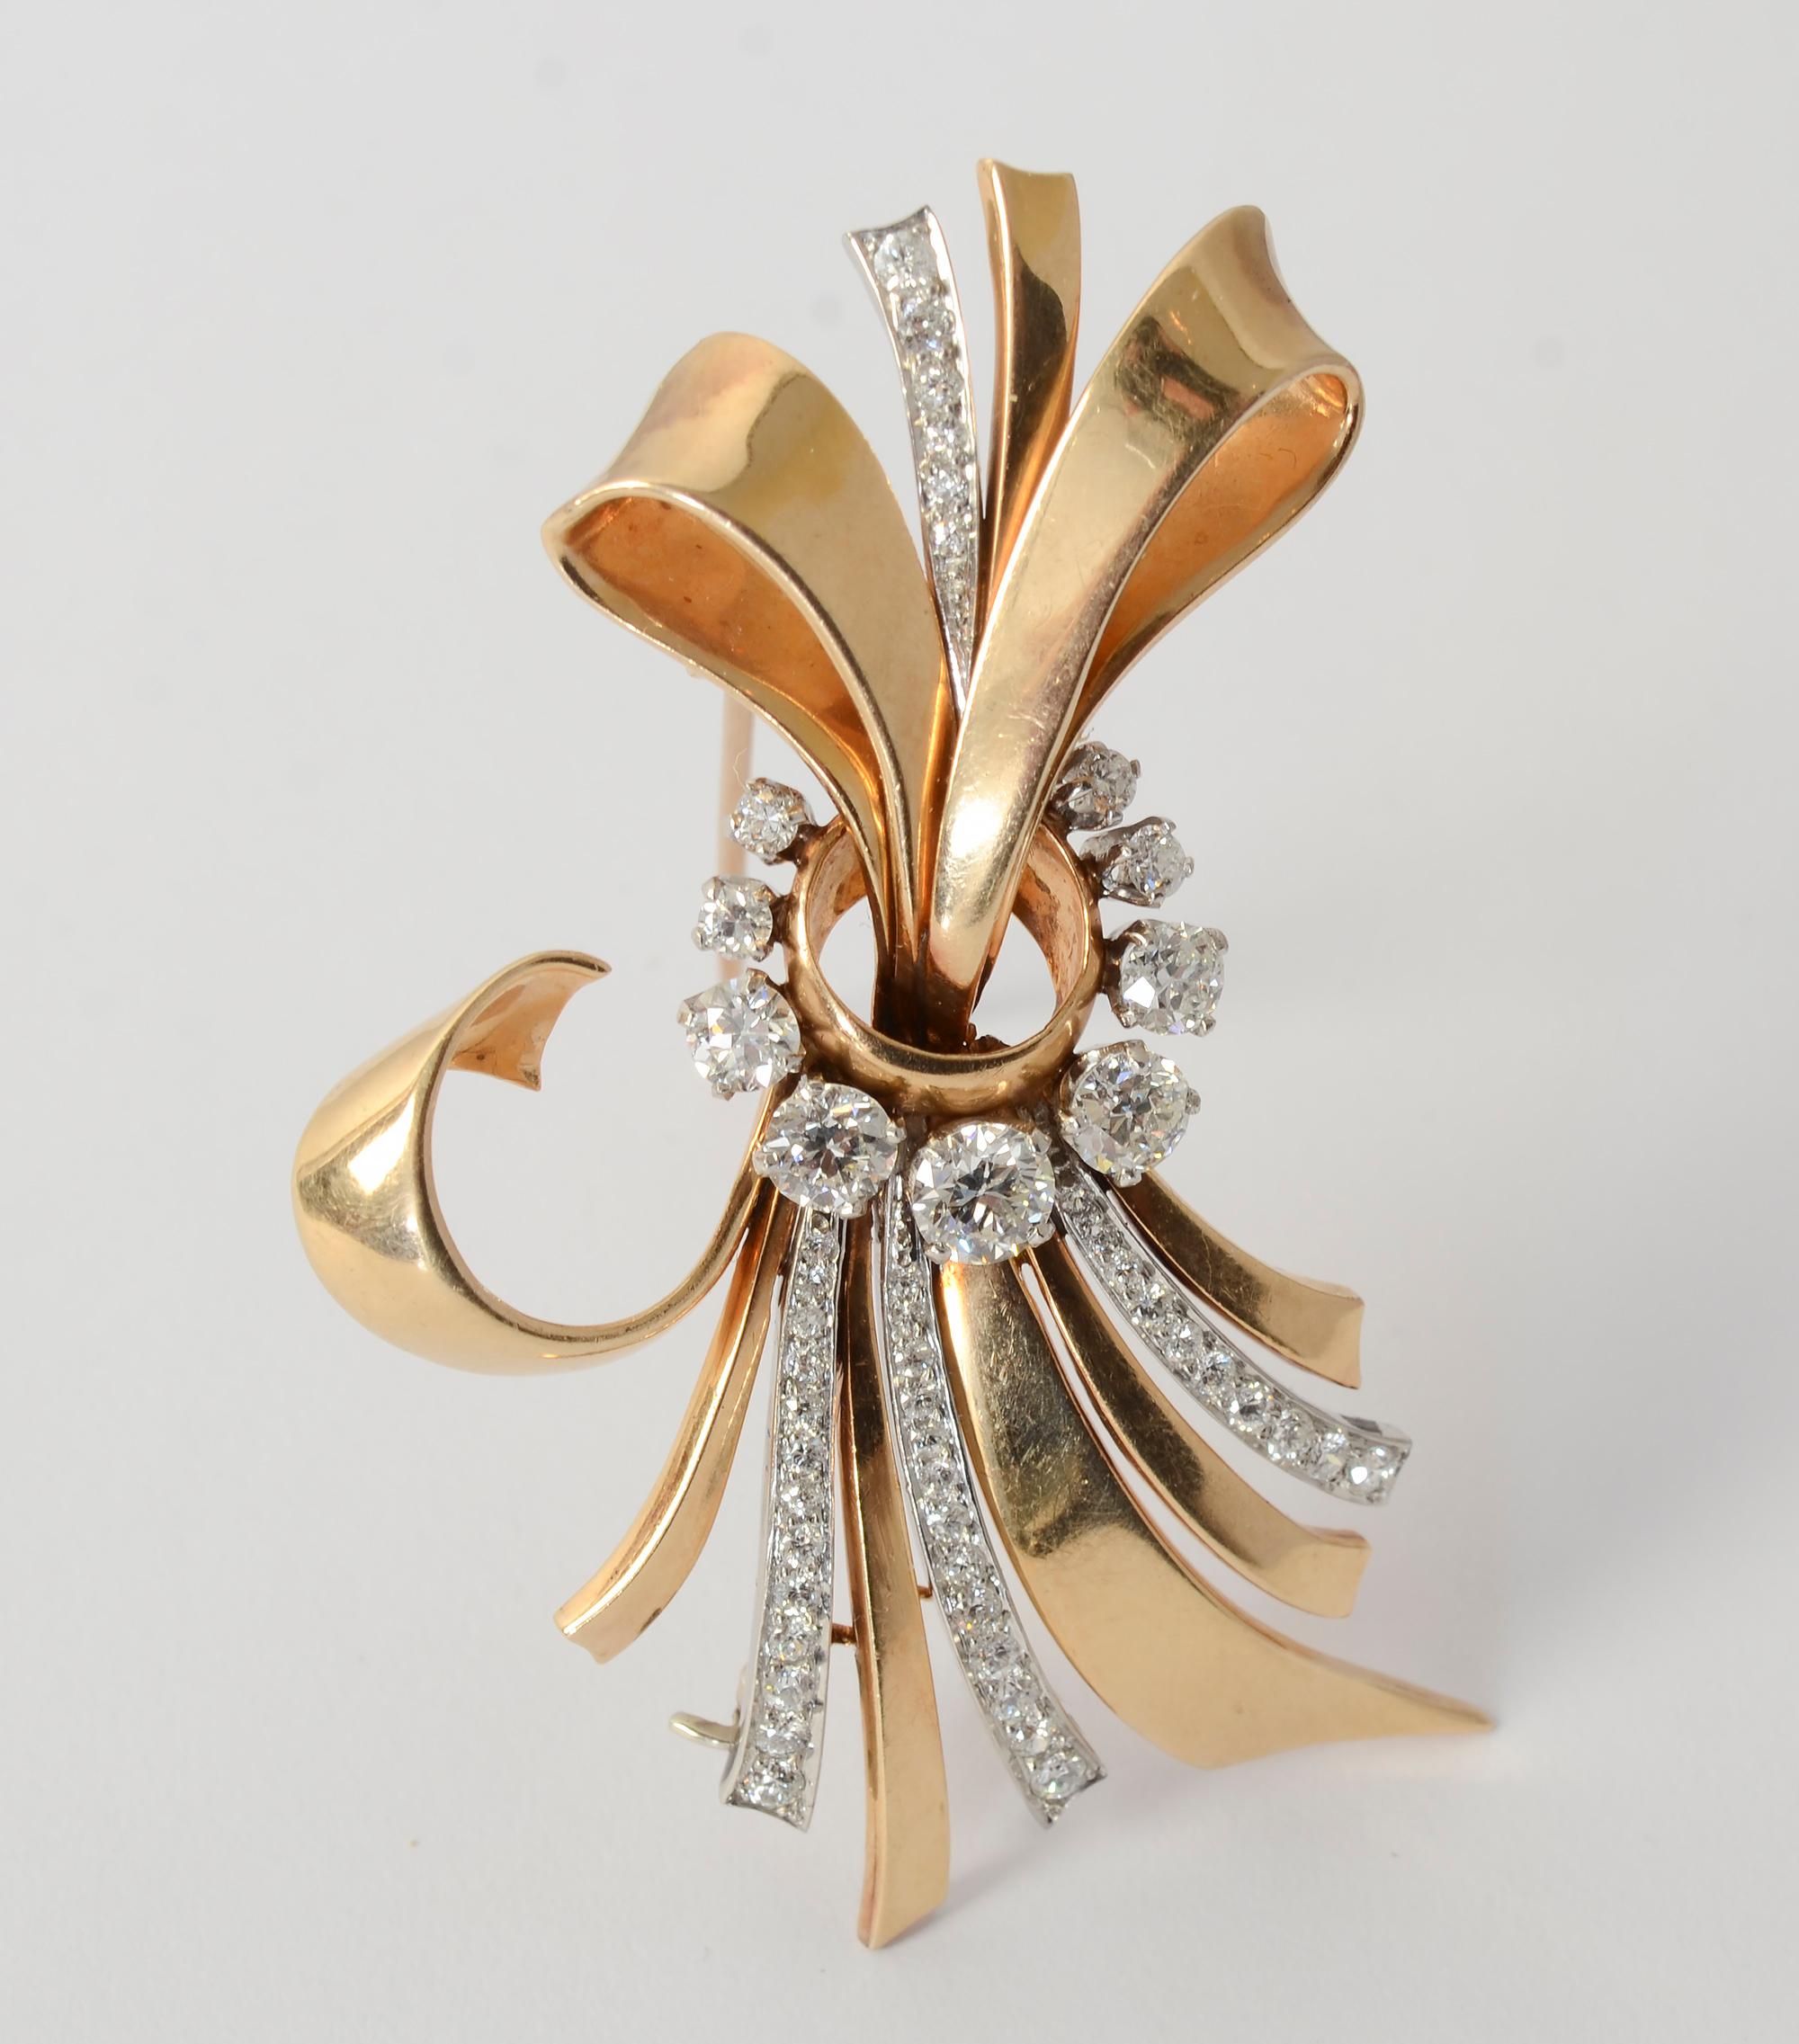 Bow design  brooch typical of the Retro era in gold, platinum and diamond  by Raymond Yard. The pin has a double stem and can be worn either vertically or horizontally. It has 3.5 carats of old European and full cut  diamonds. The stones are VVS and